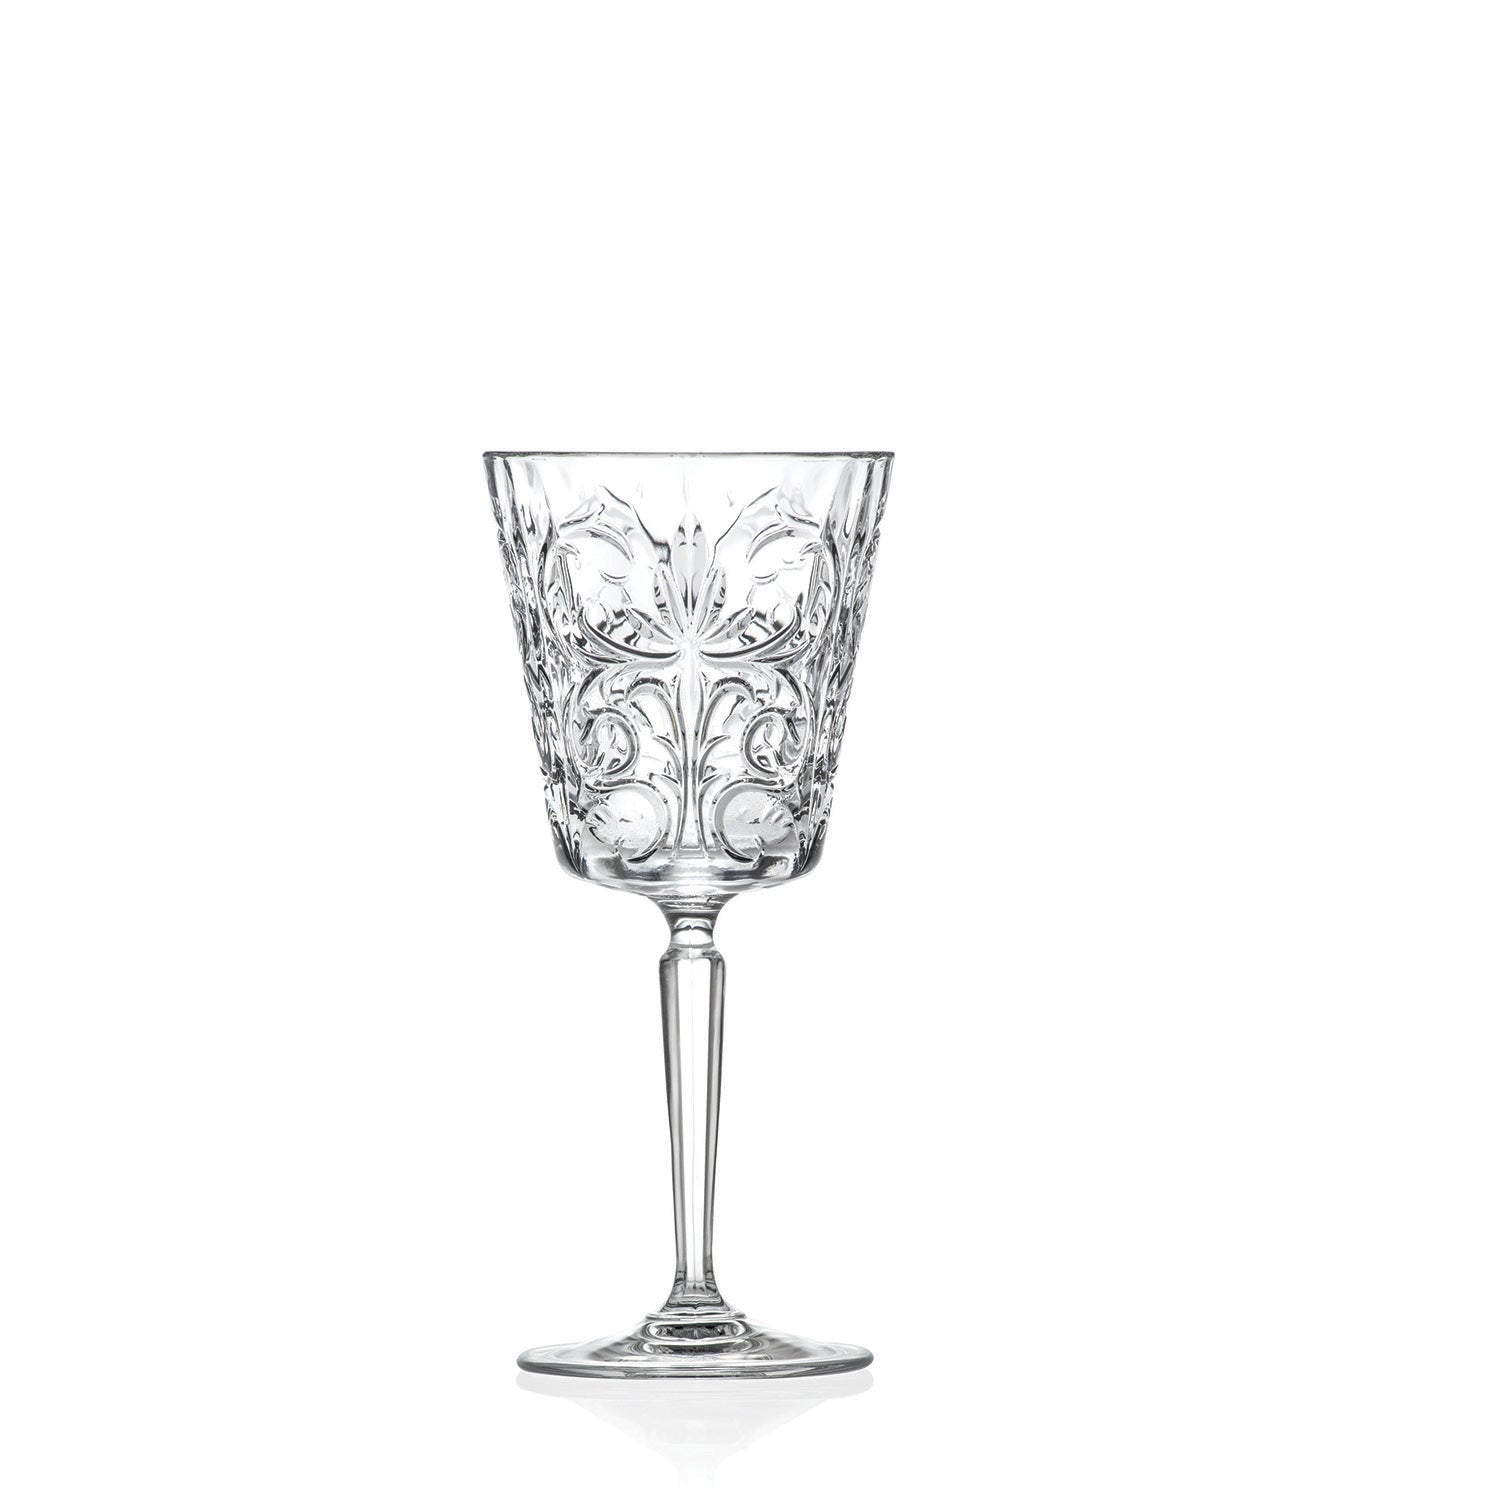 RCR (Made in Italy) Tattoo Crystal Wine Goblet Glasses, 290 ml, Set of 6